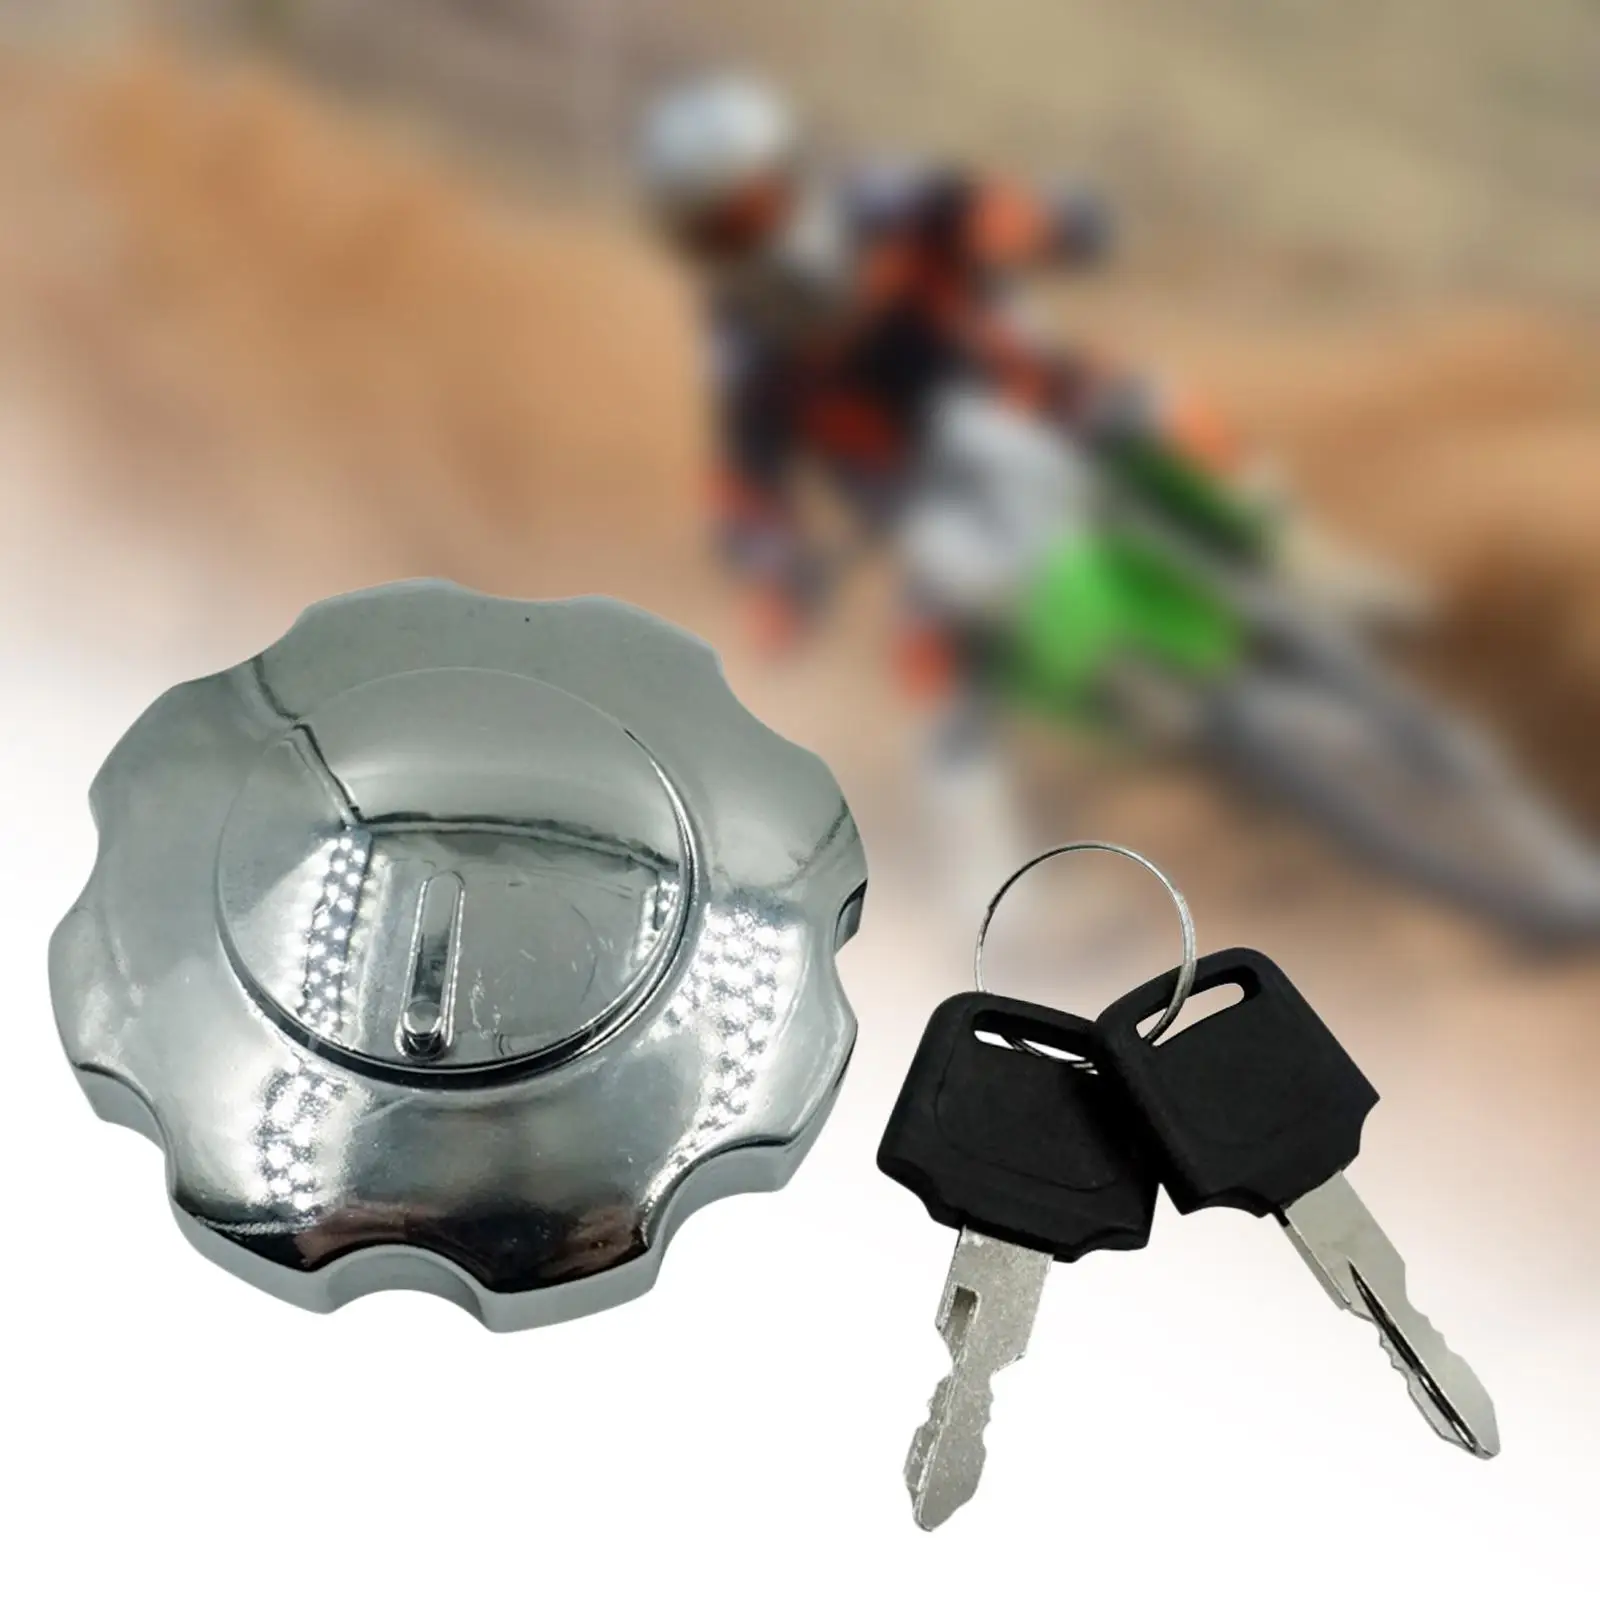 Motorcycle Fuel Cap Fuel Tank Cover with 2 Keys Replacement Easily Install Aluminum Alloy Locking Fuel Cap Repair Spare Parts